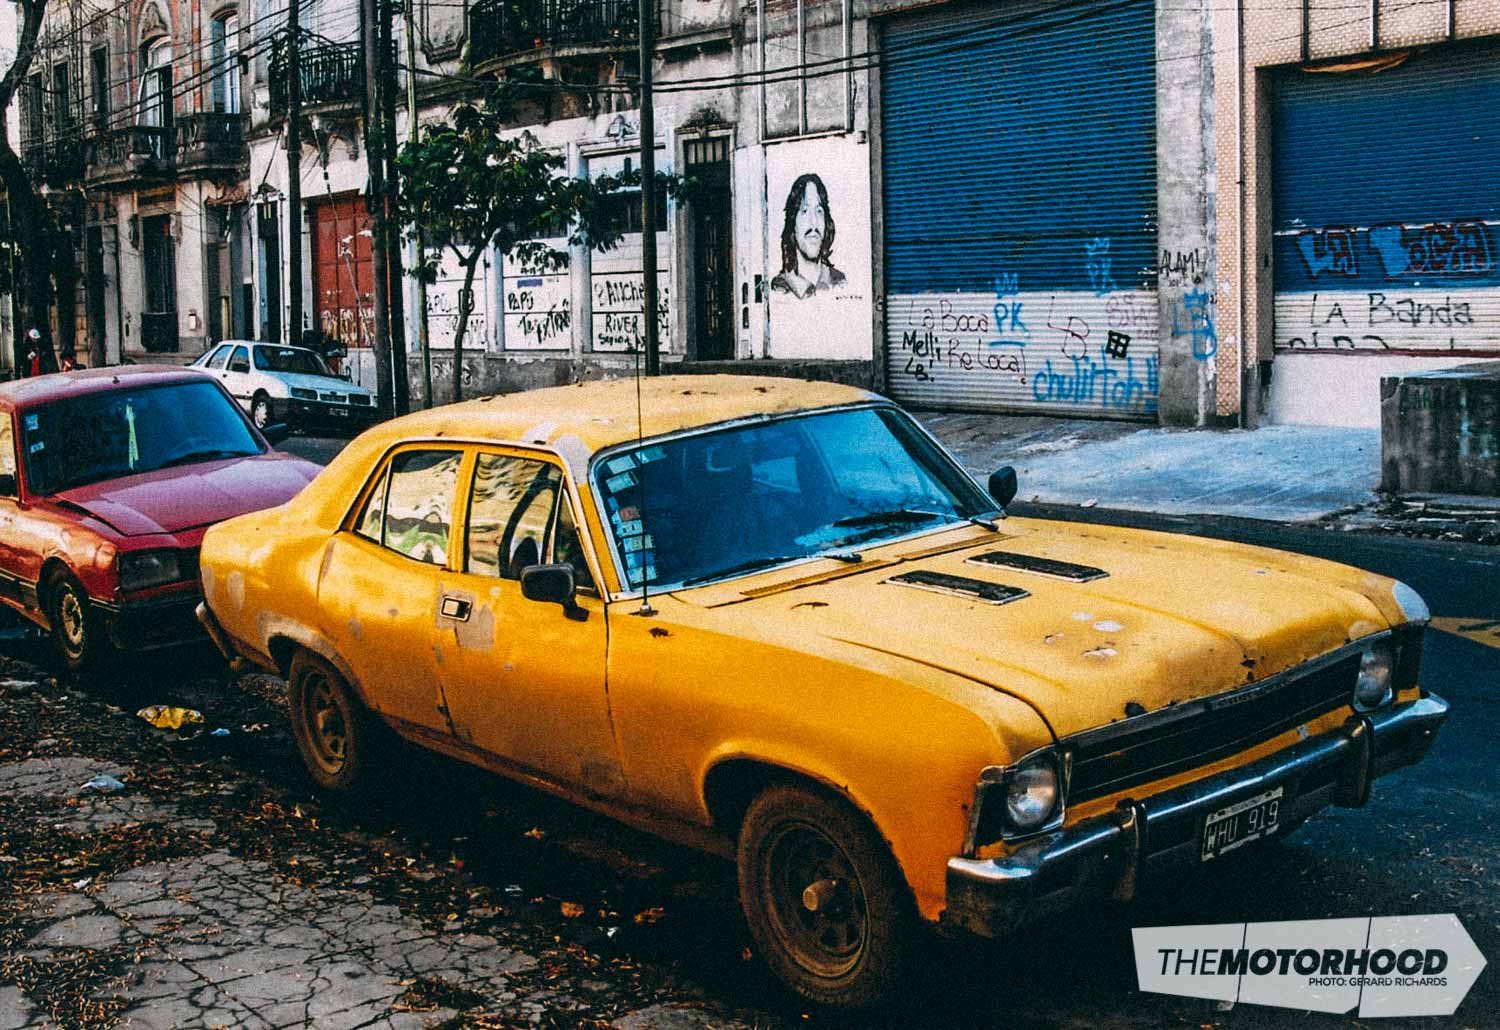 Well-used early ’70s Chevrolet Nova/Malibu spotted in the slightly dodgy backstreets in the soccer-mad suburb of La Boca, Buenos Aires